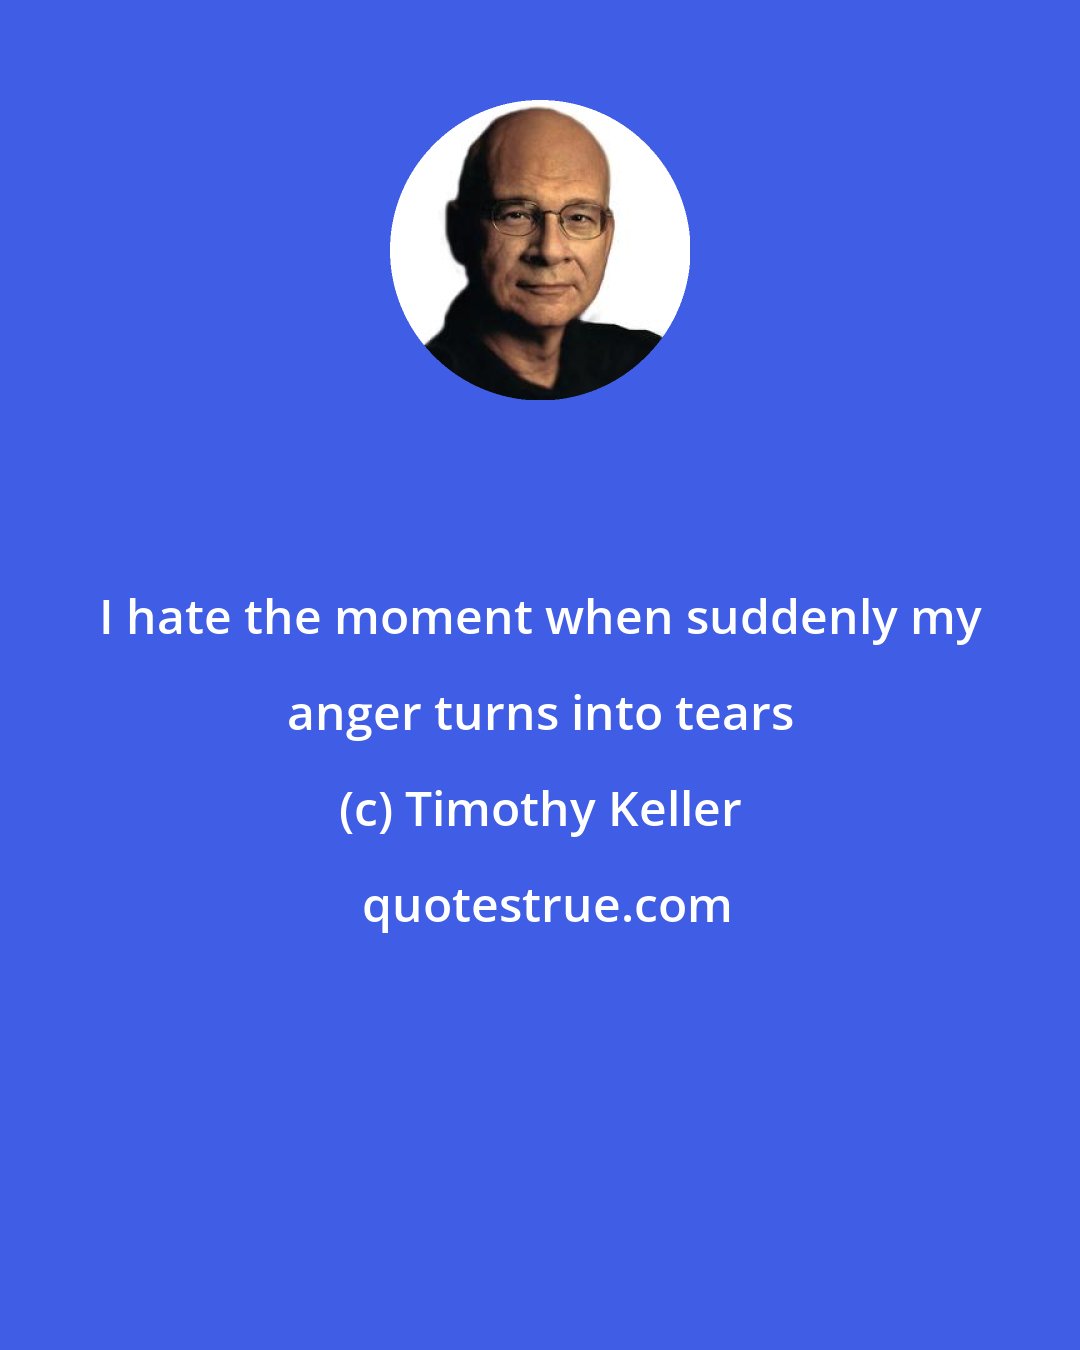 Timothy Keller: I hate the moment when suddenly my anger turns into tears